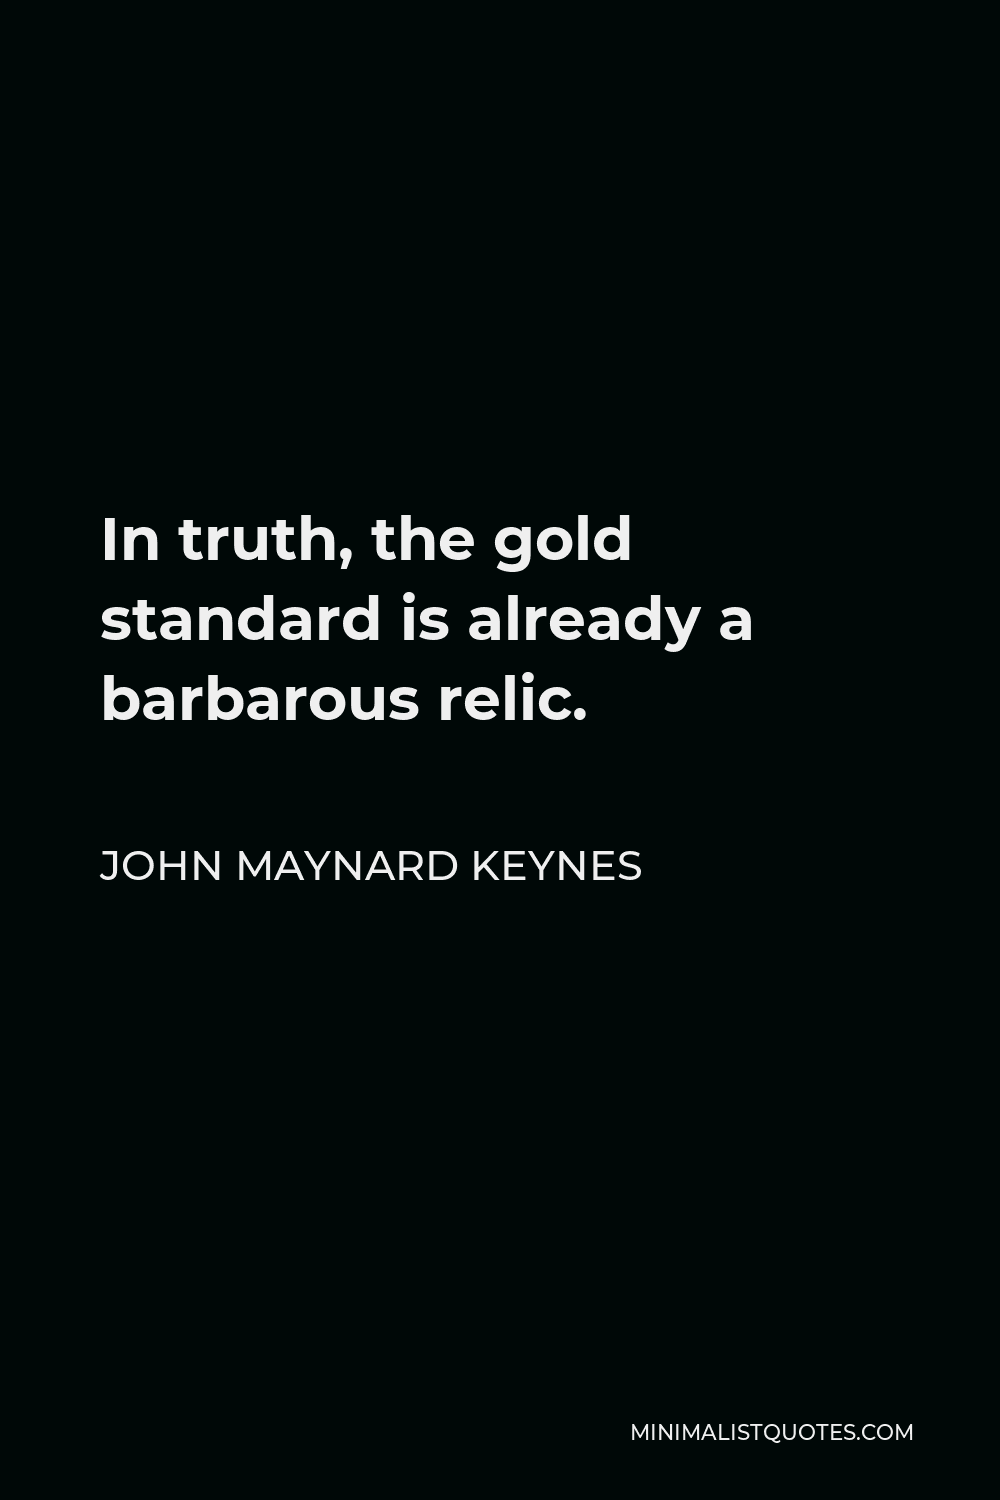 John Maynard Keynes Quote - In truth, the gold standard is already a barbarous relic.